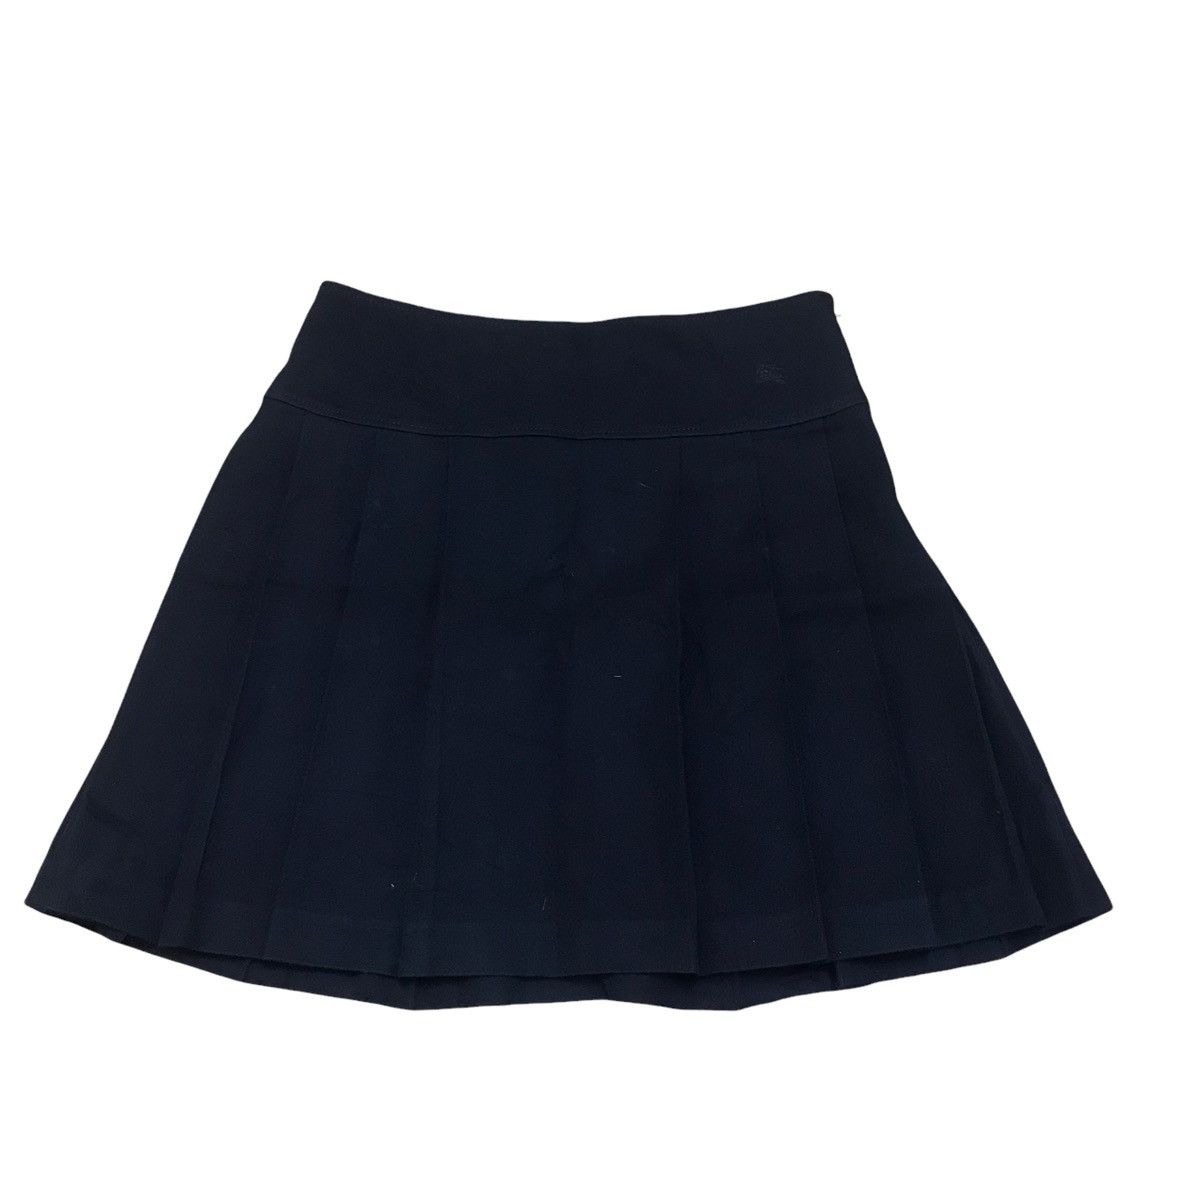 Burberry blue label small embroidery logo black wool skirt - 1